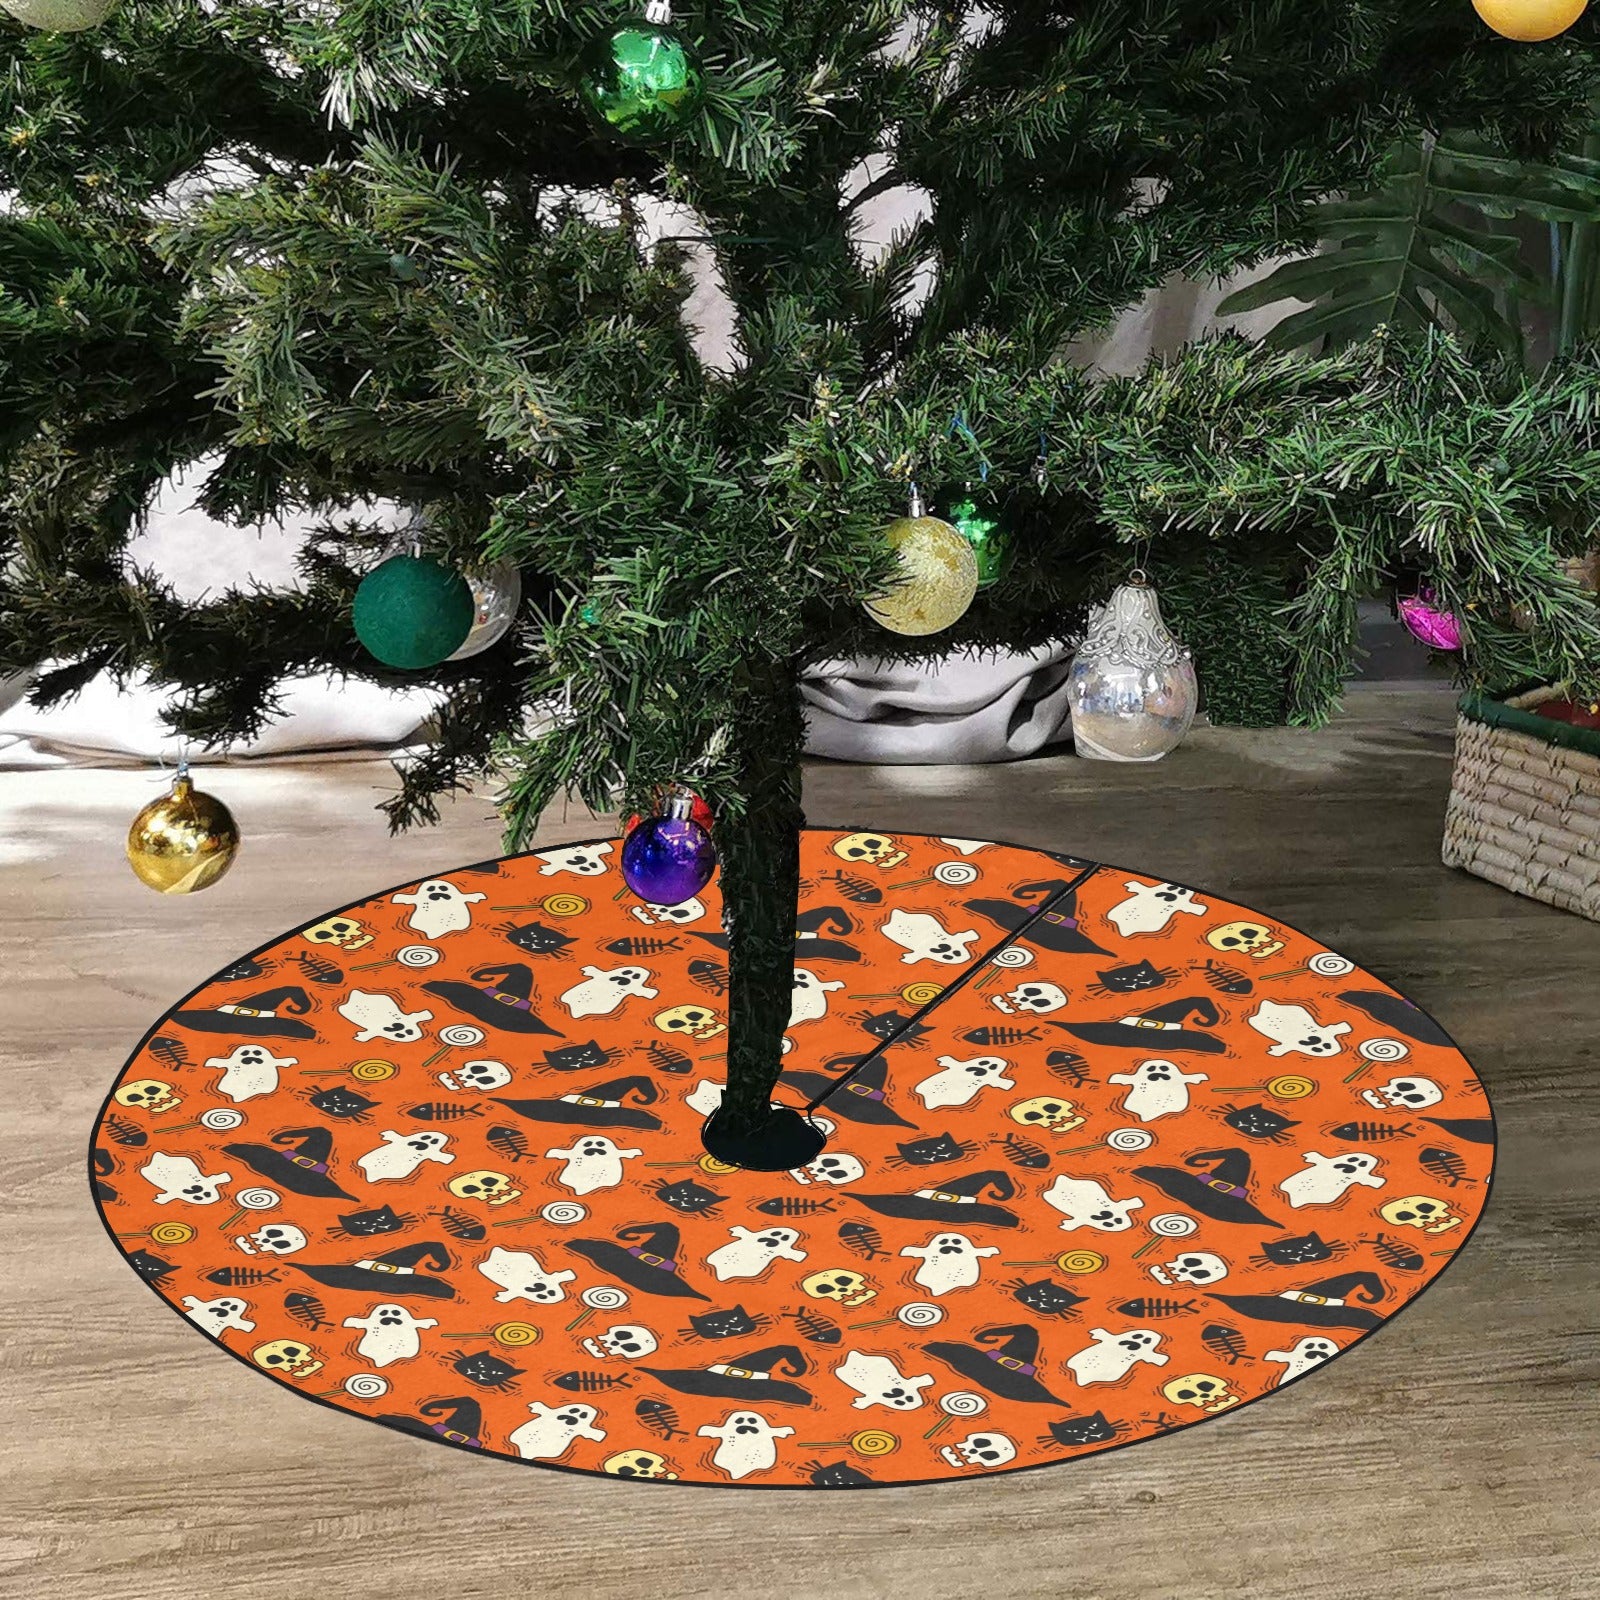 Halloween Tree Skirt, Orange Black Cat Ghosts Christmas Stand Base Cover Home Decor Decoration All Hallows Eve Creepy Spooky Party Starcove Fashion